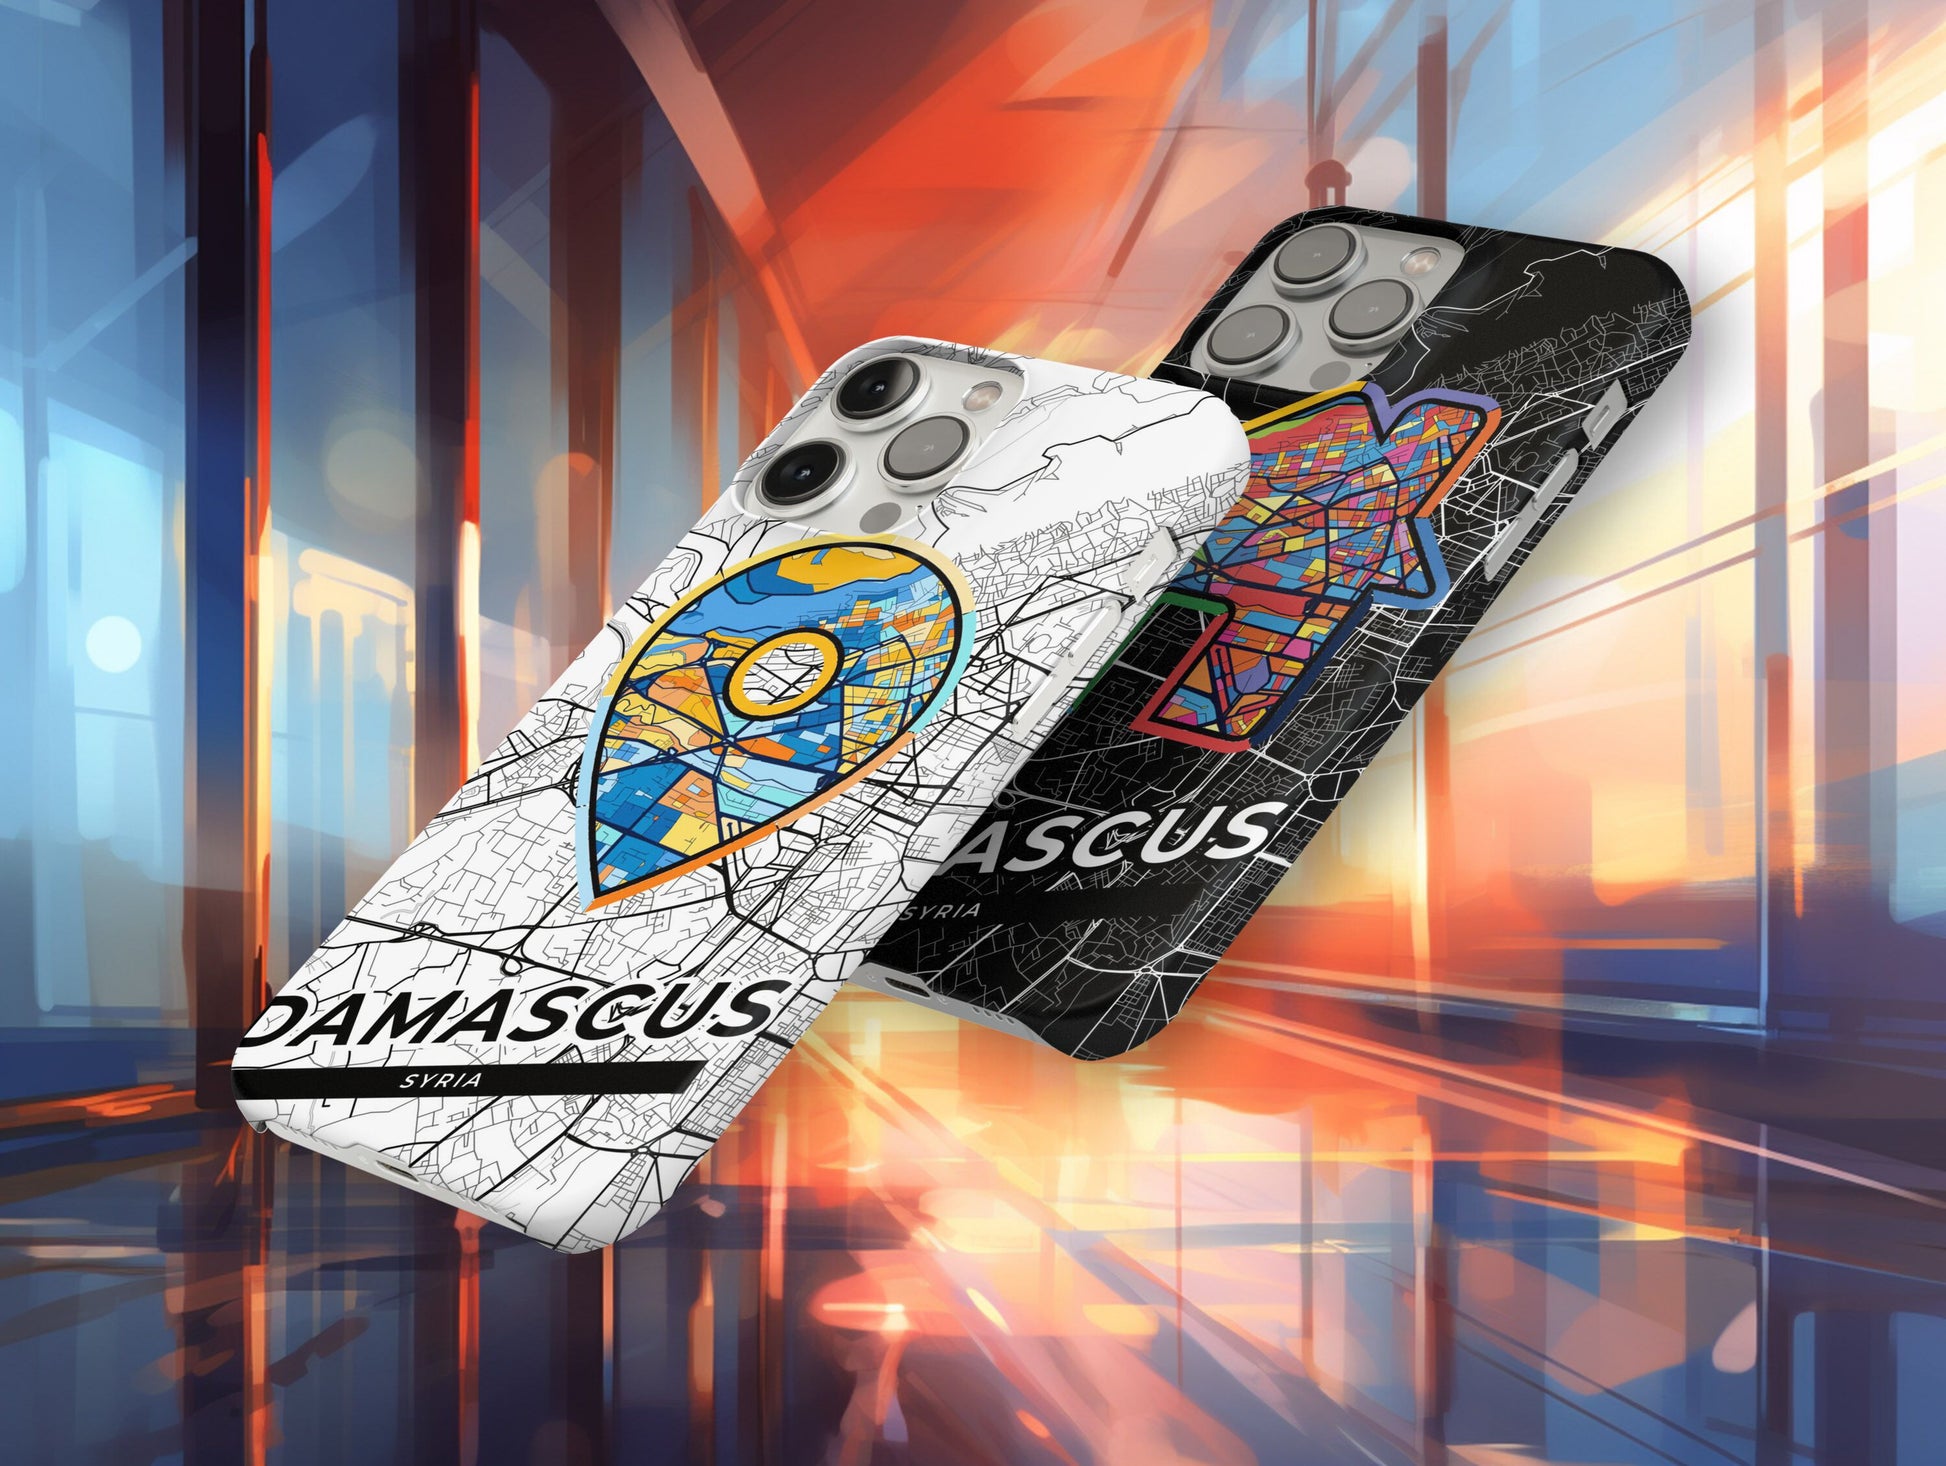 Damascus Syria slim phone case with colorful icon. Birthday, wedding or housewarming gift. Couple match cases.